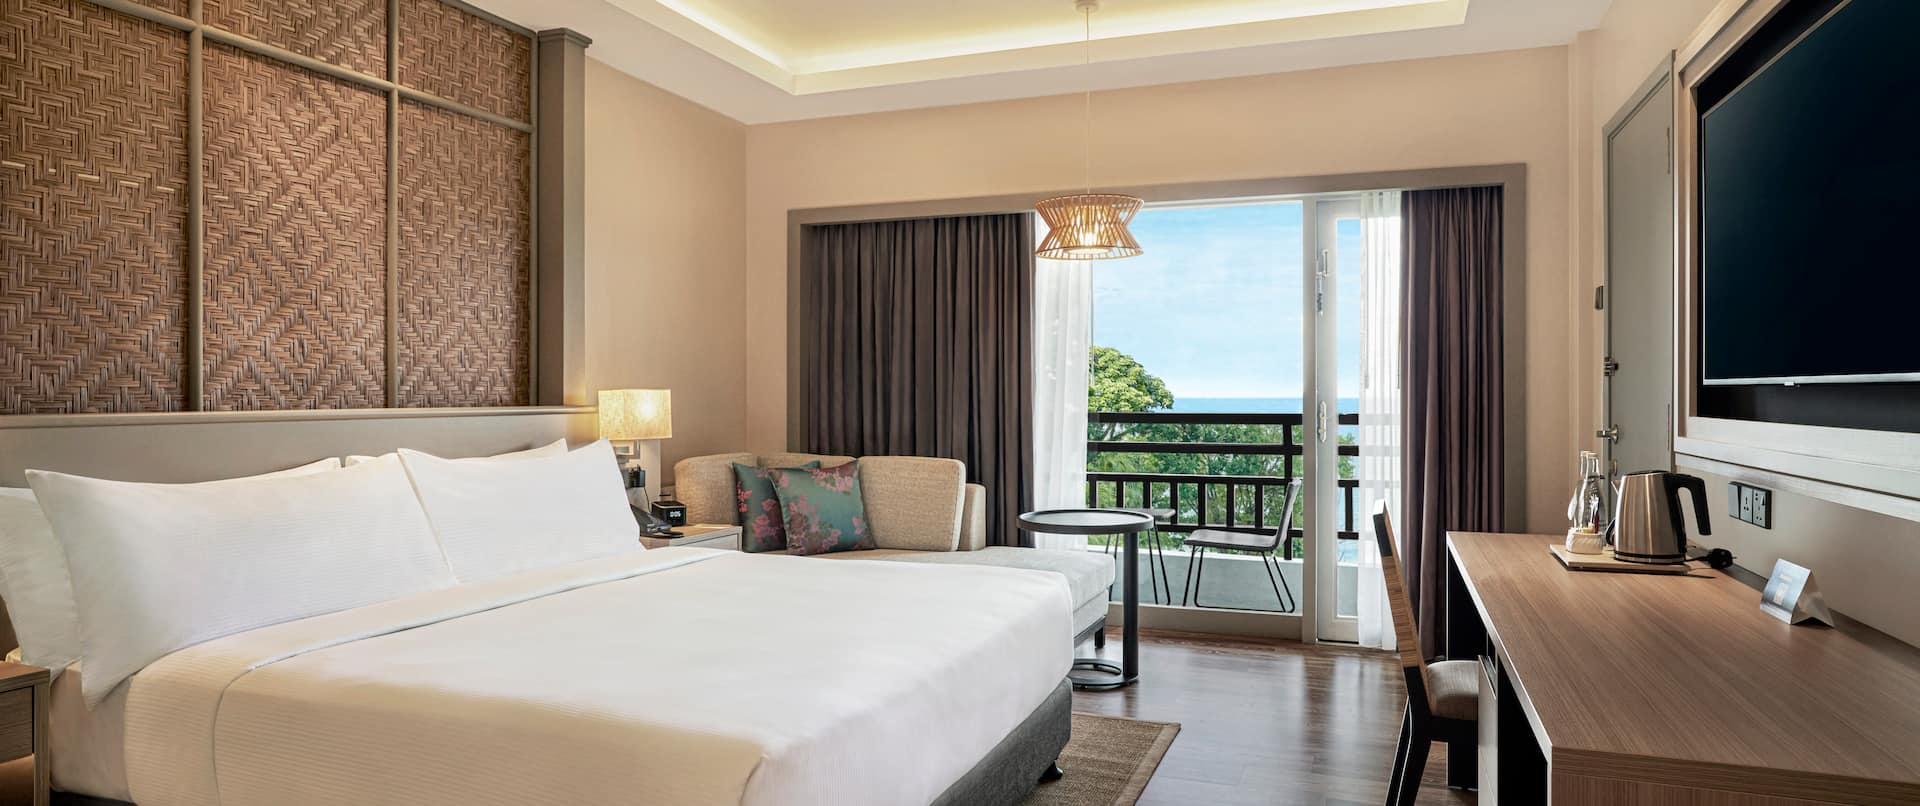 King guest room with balcony, sea view and wall mounted TV